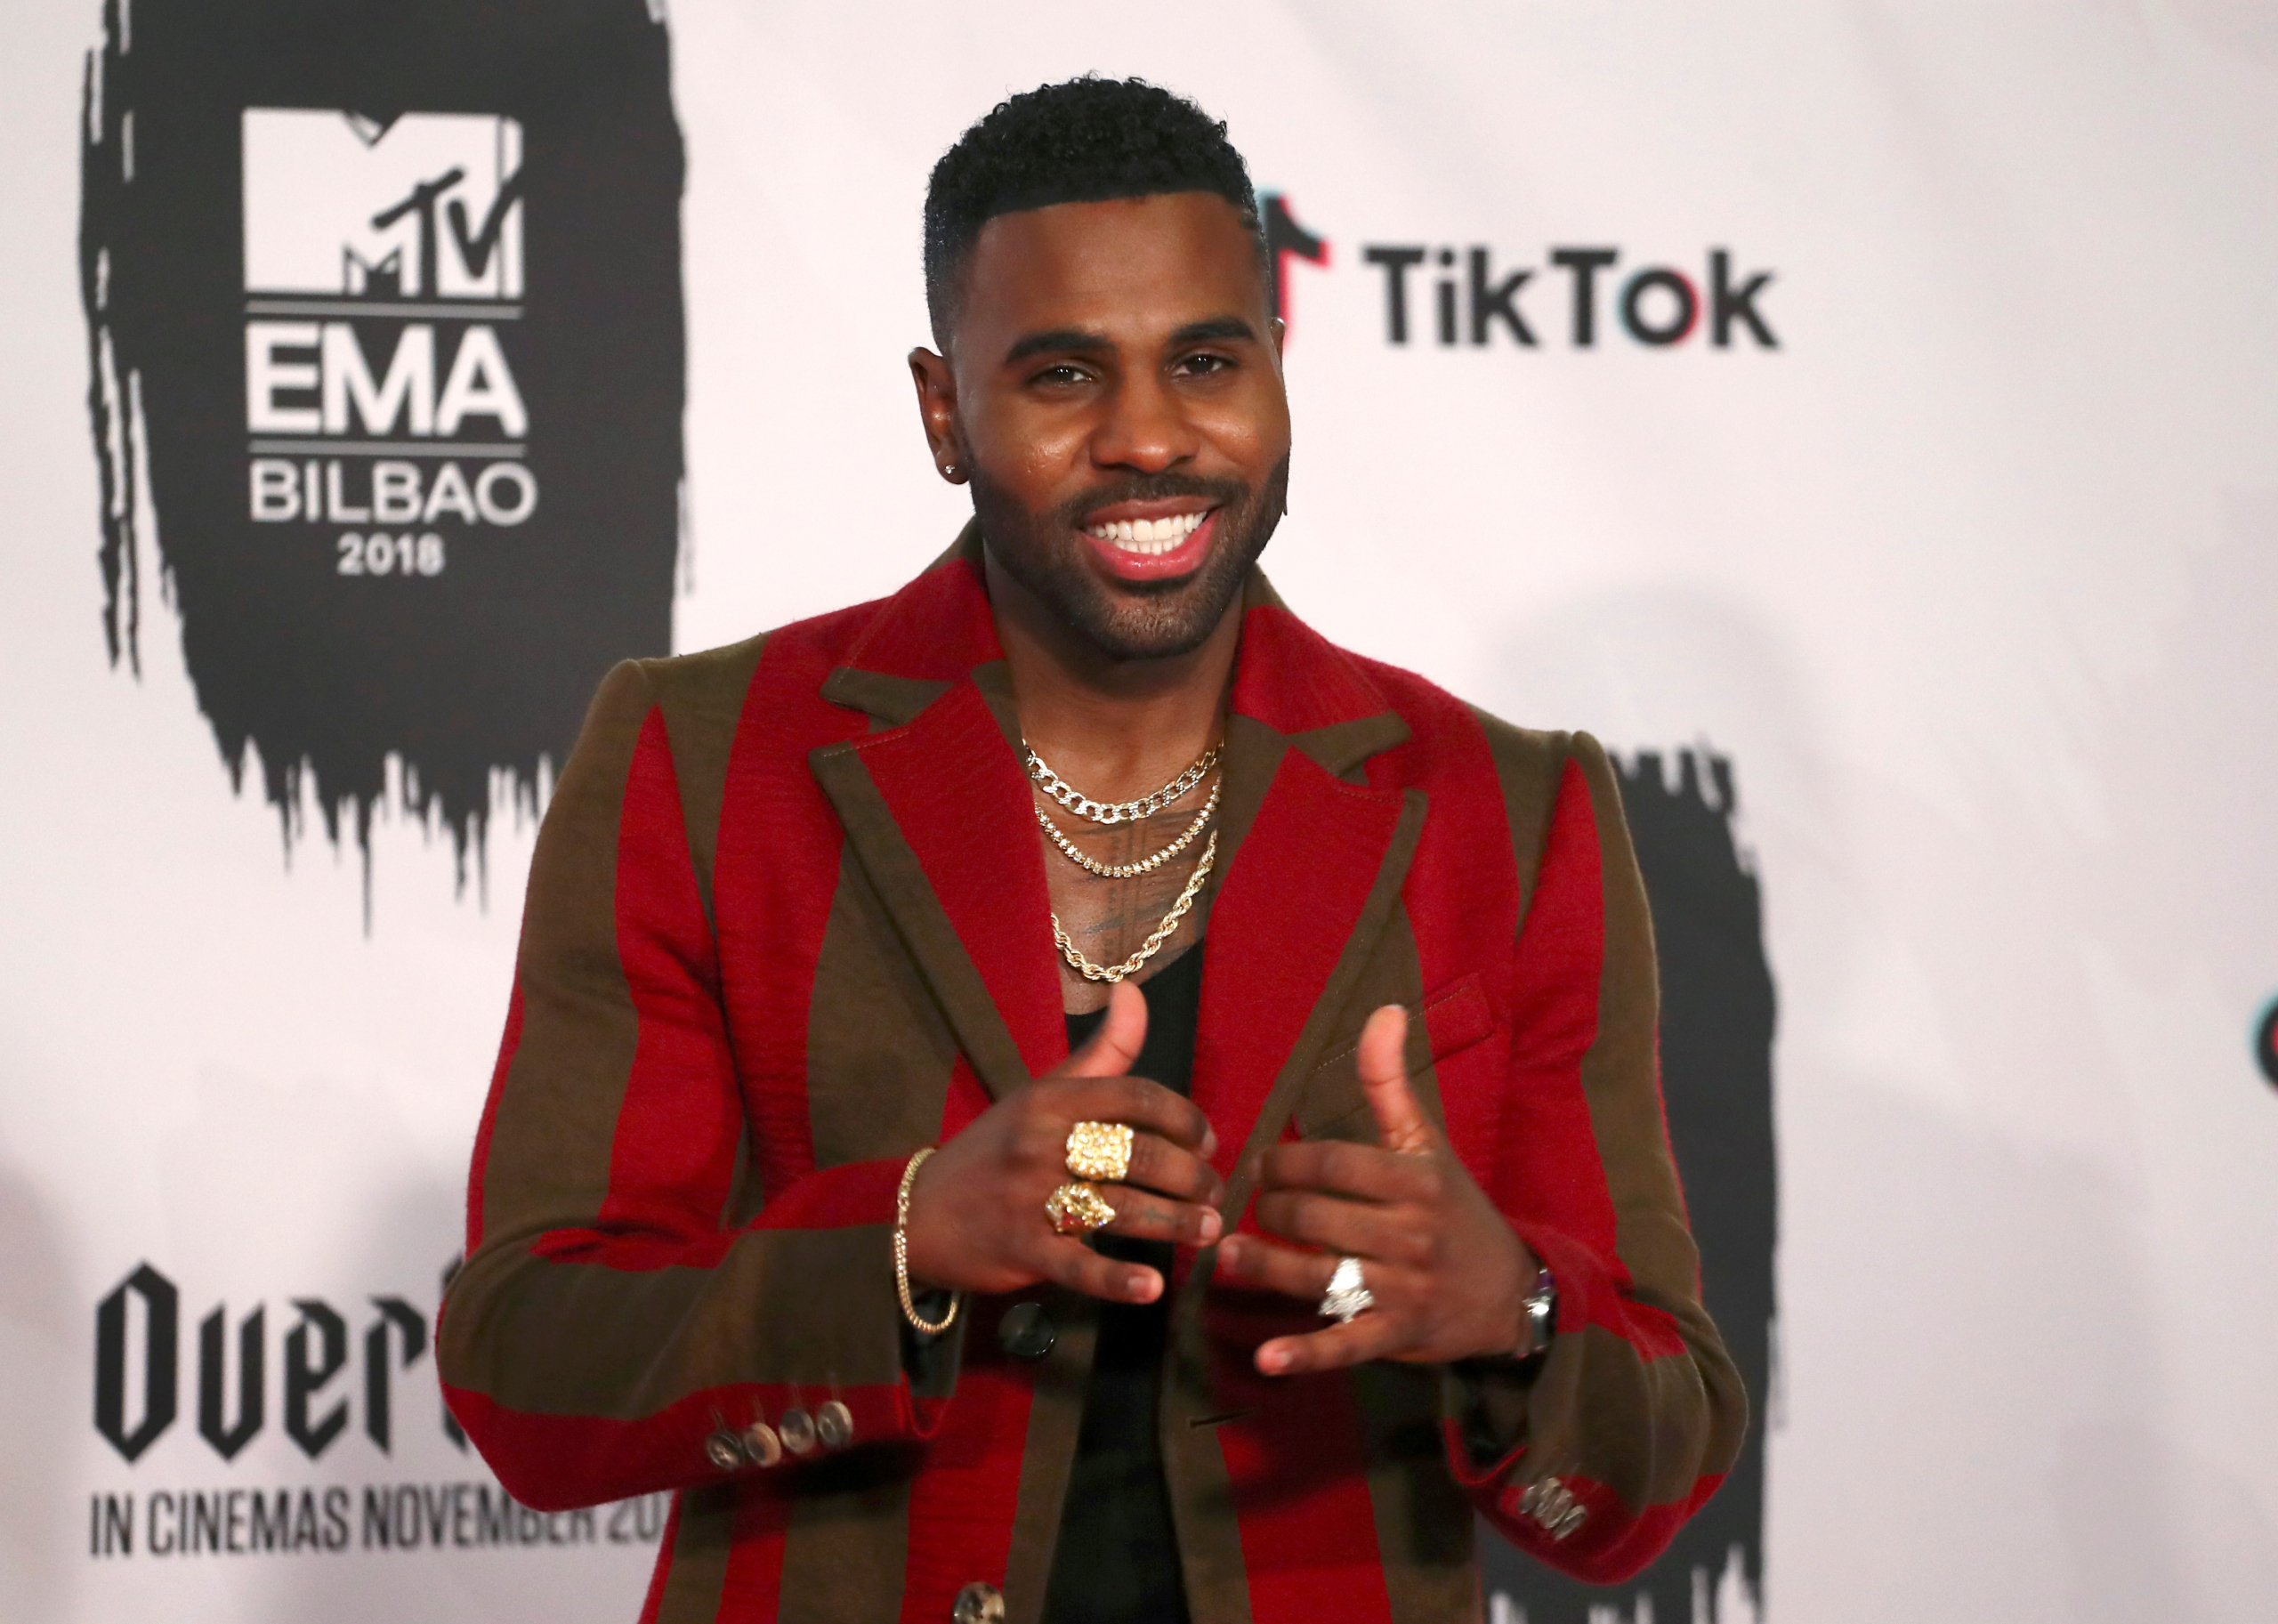 TELL ME SOMETHING GOOD: Jason Derulo tips server $5,000 while out to eat with his family